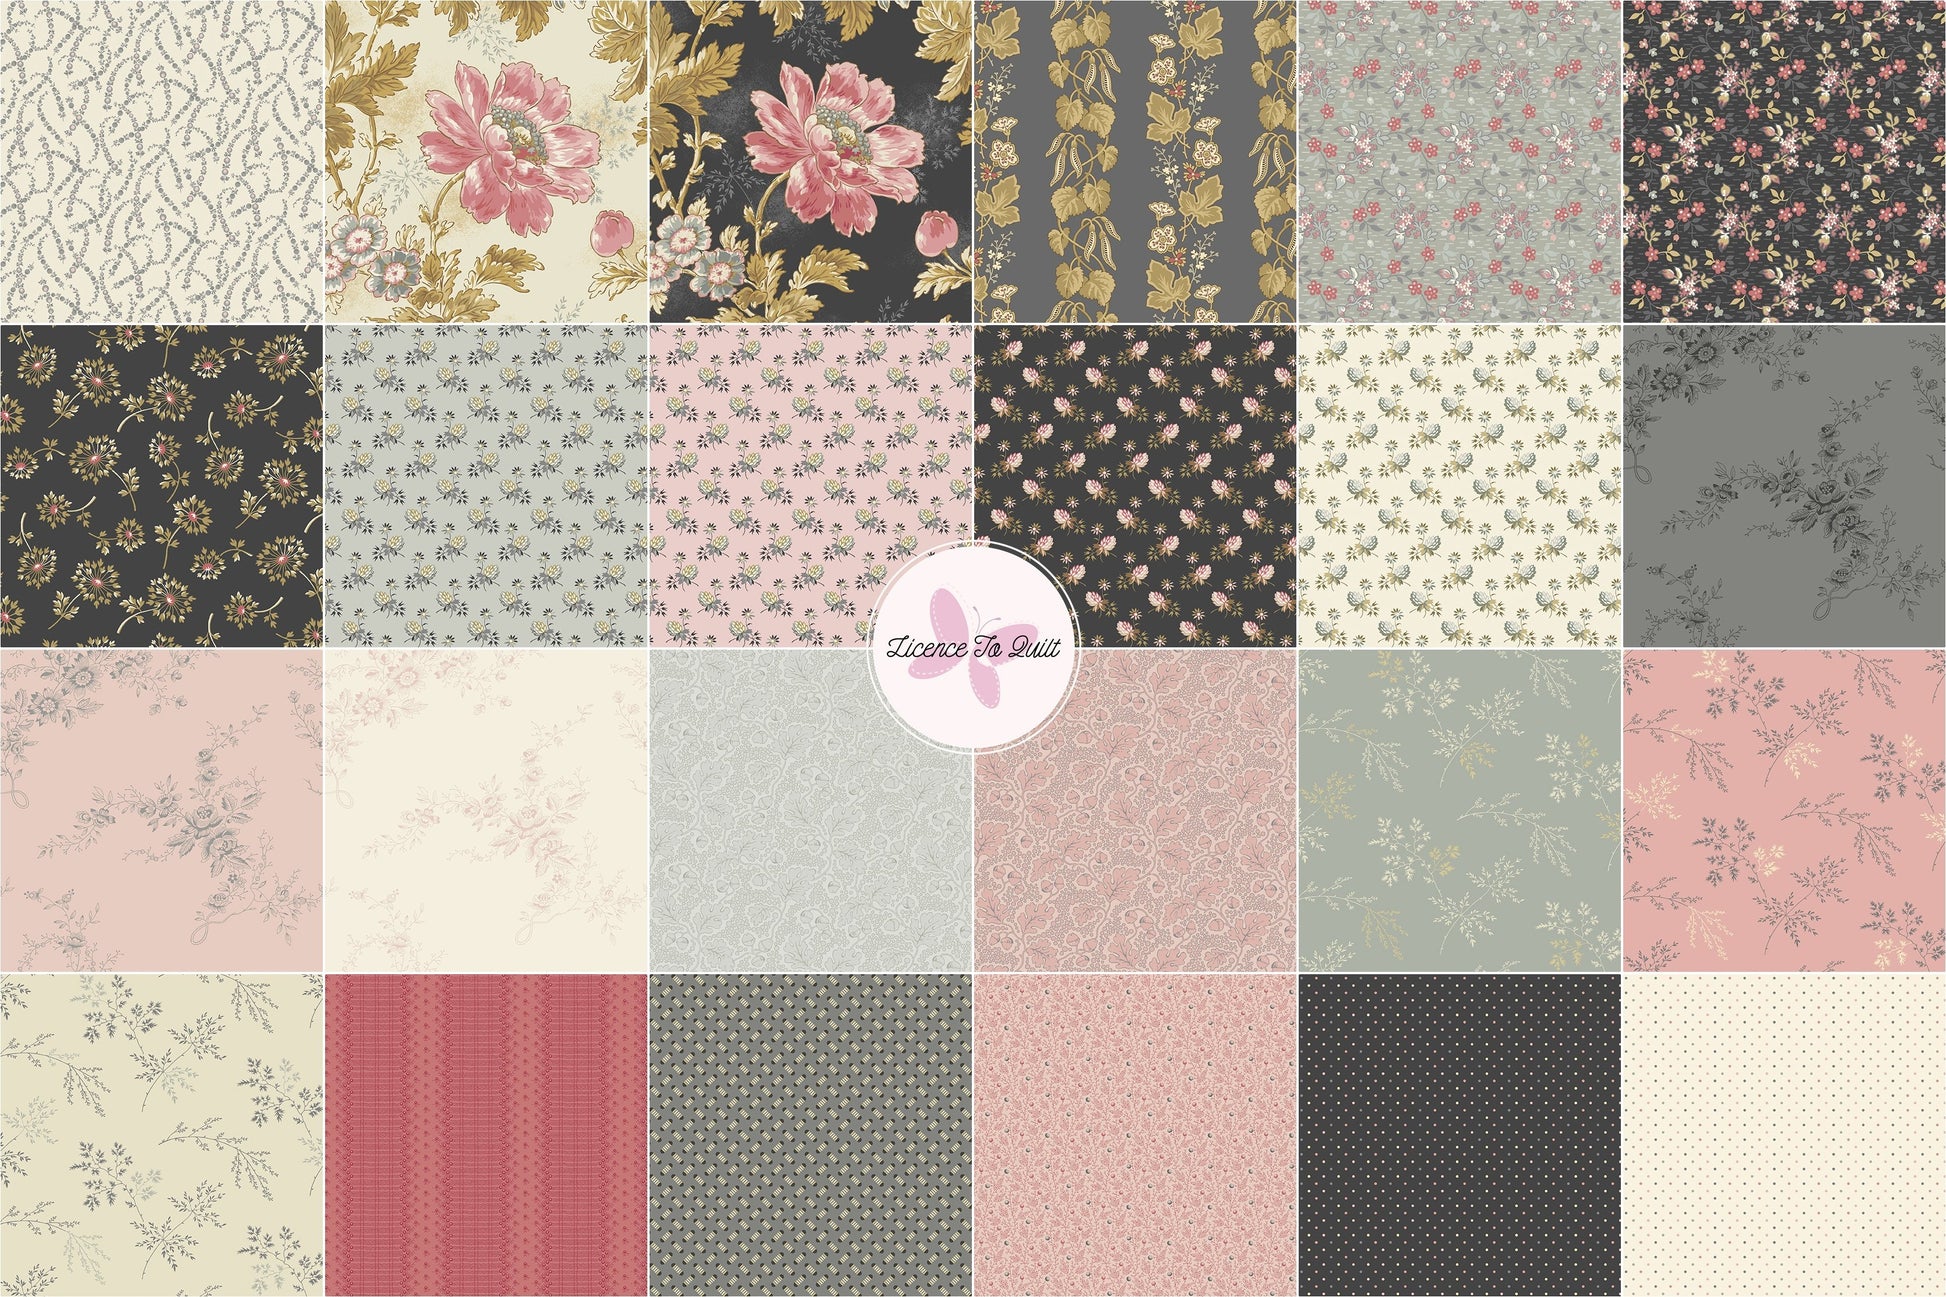 Moonstone - Dovetail Sweet Pea - Licence To Quilt